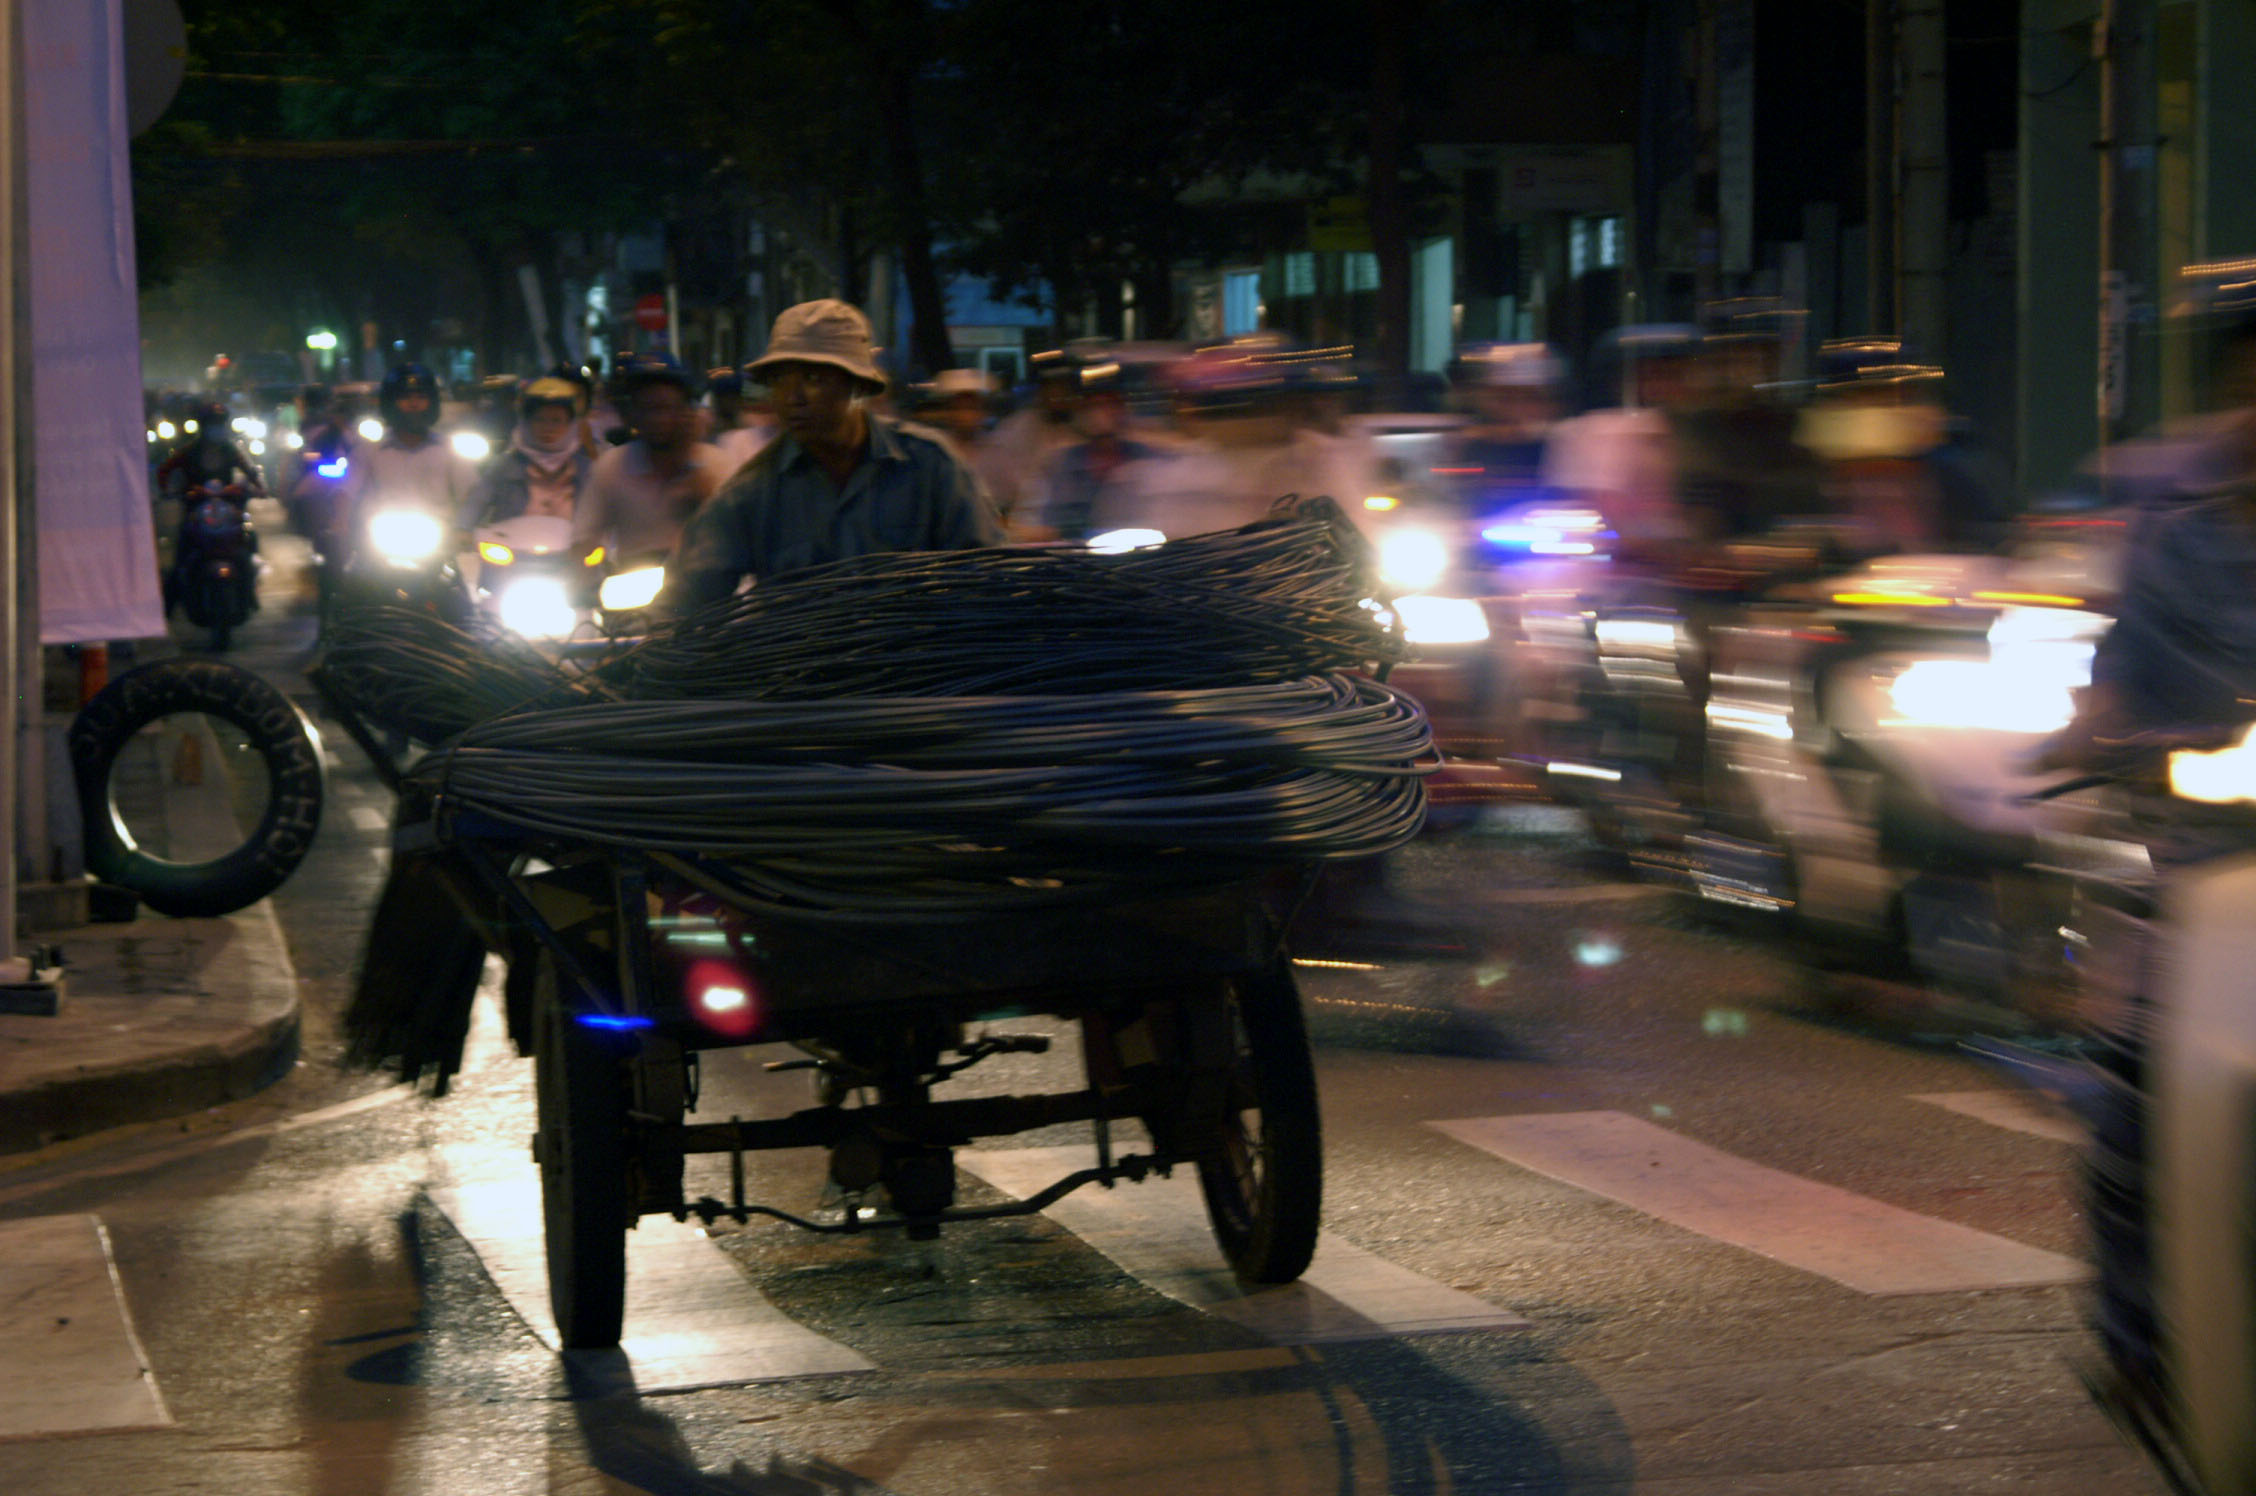 Rikshaw driver in Ho Chi Minh City (Saigon) transporting iron cable at dusk light conditions